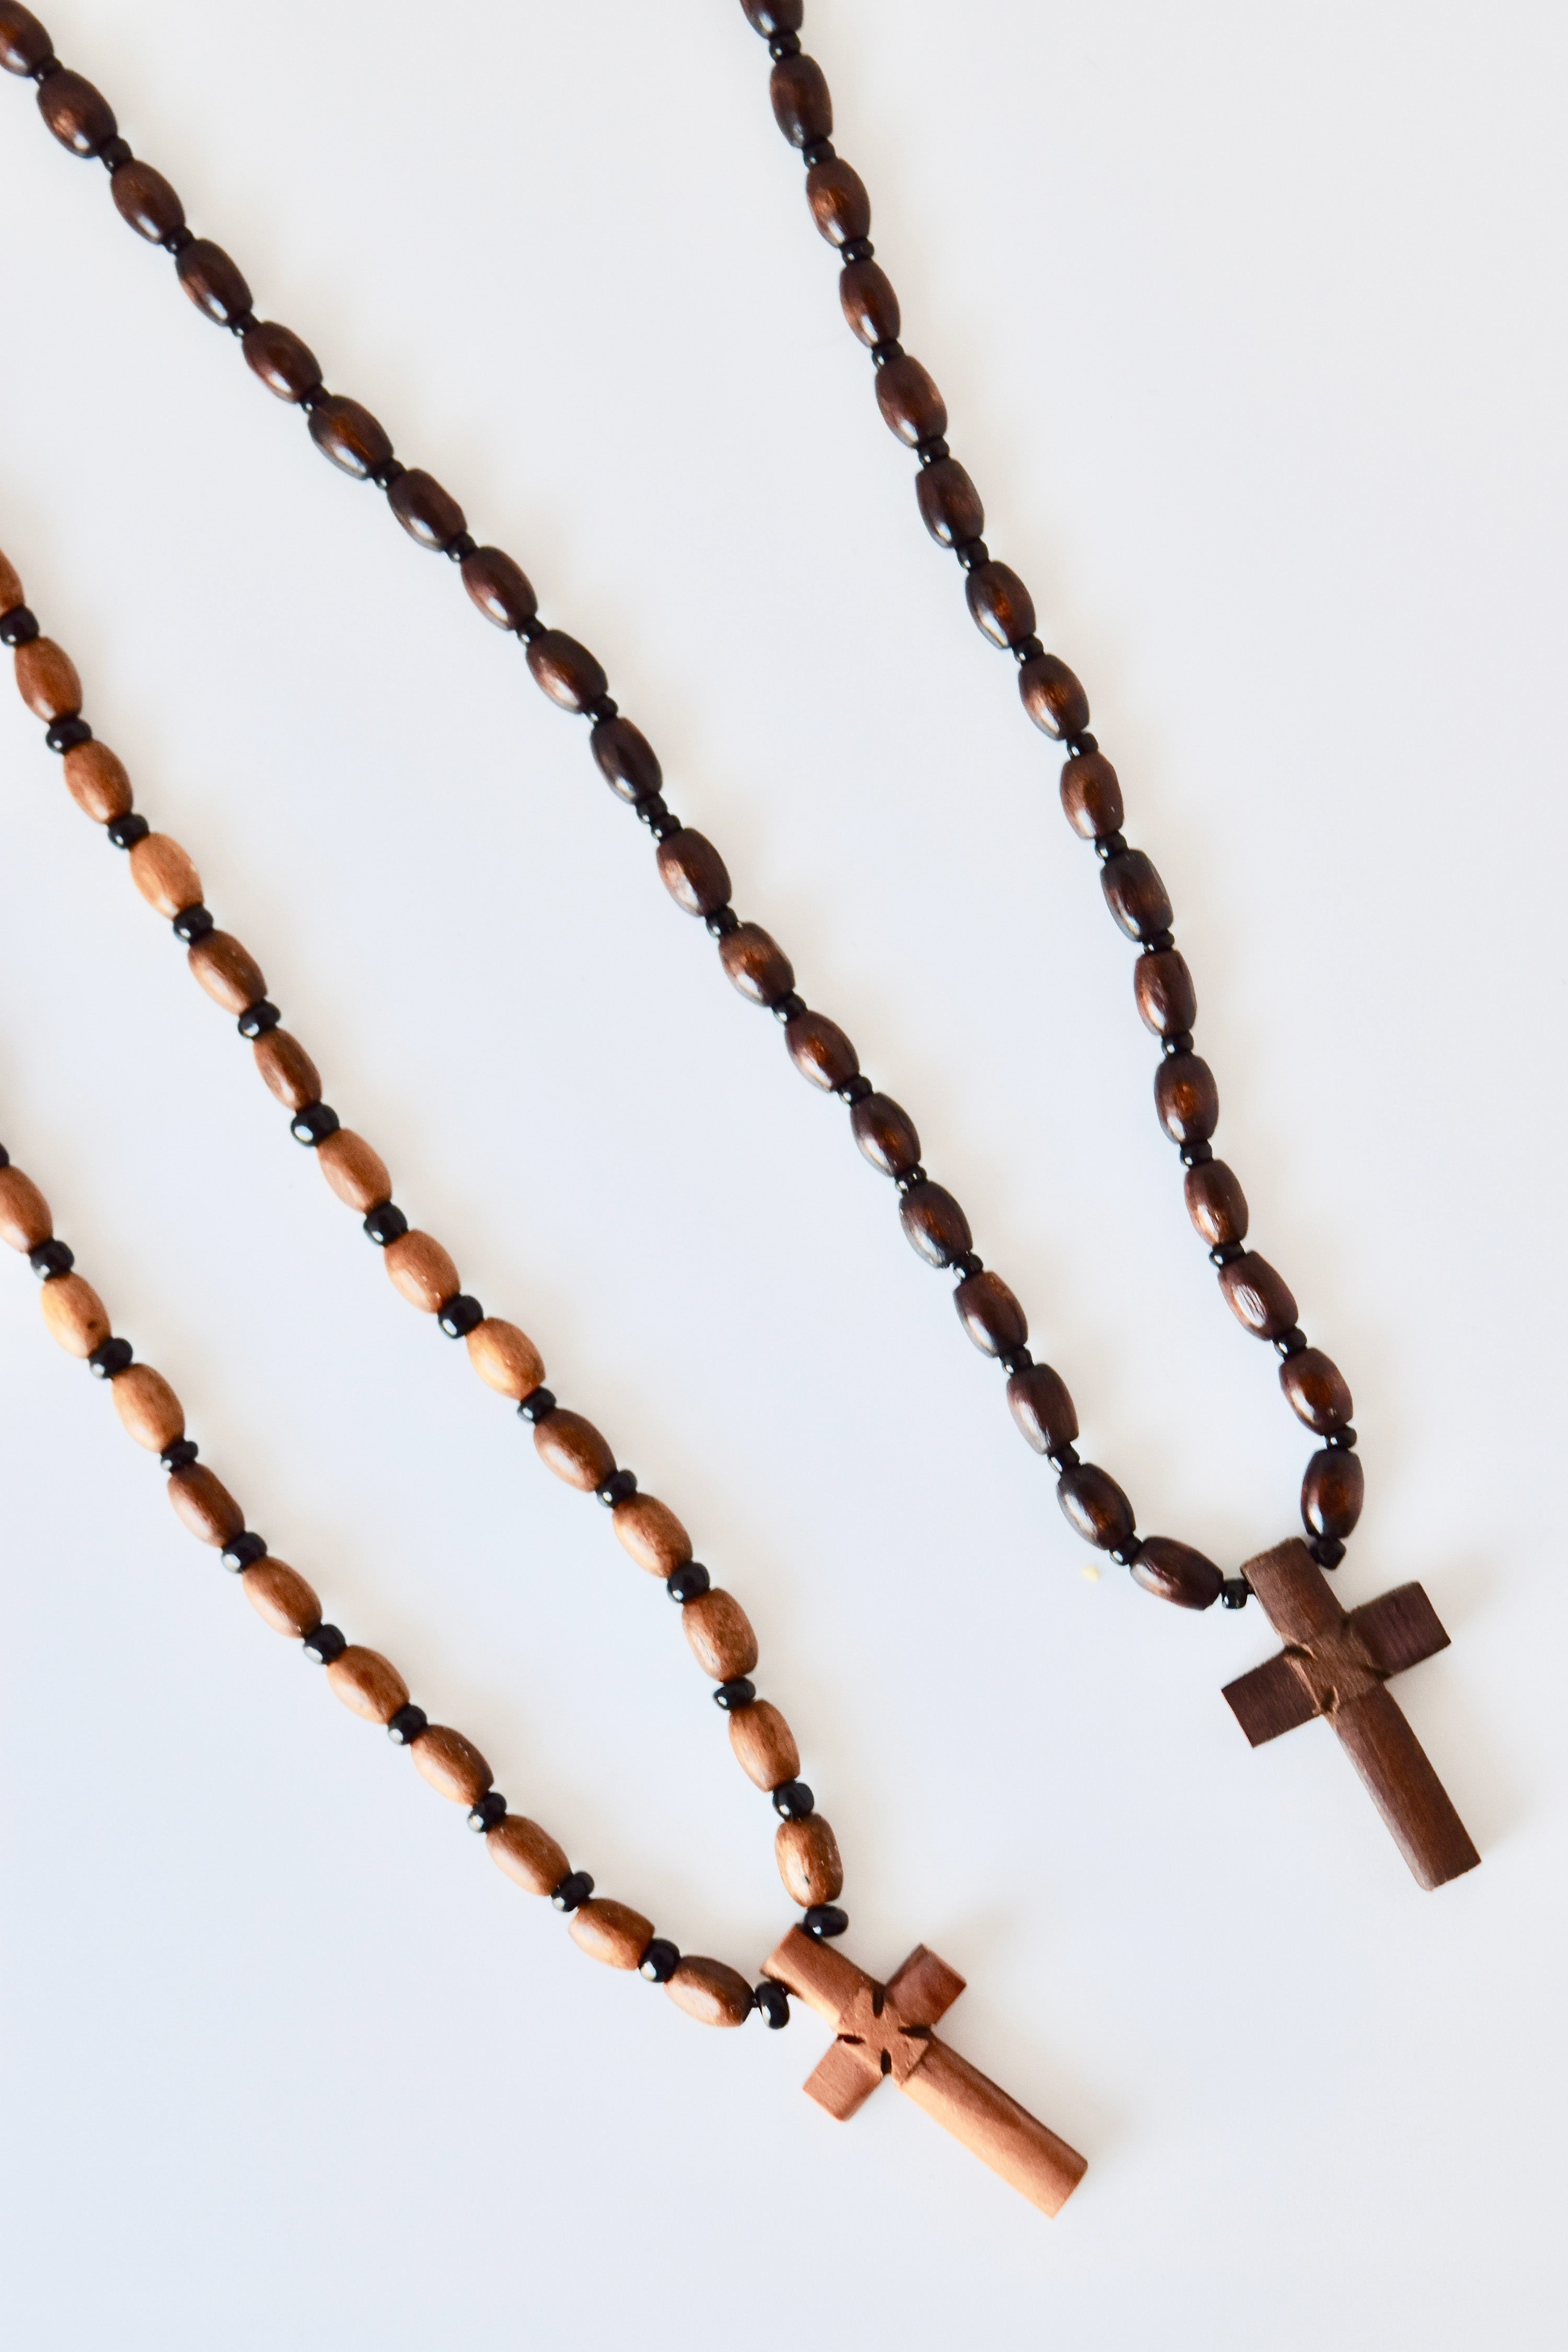 ZUARFY Wooden Grain Beads Jesus Cross Rosary Necklace Carved Rosary Pendant  Christian - Walmart.com